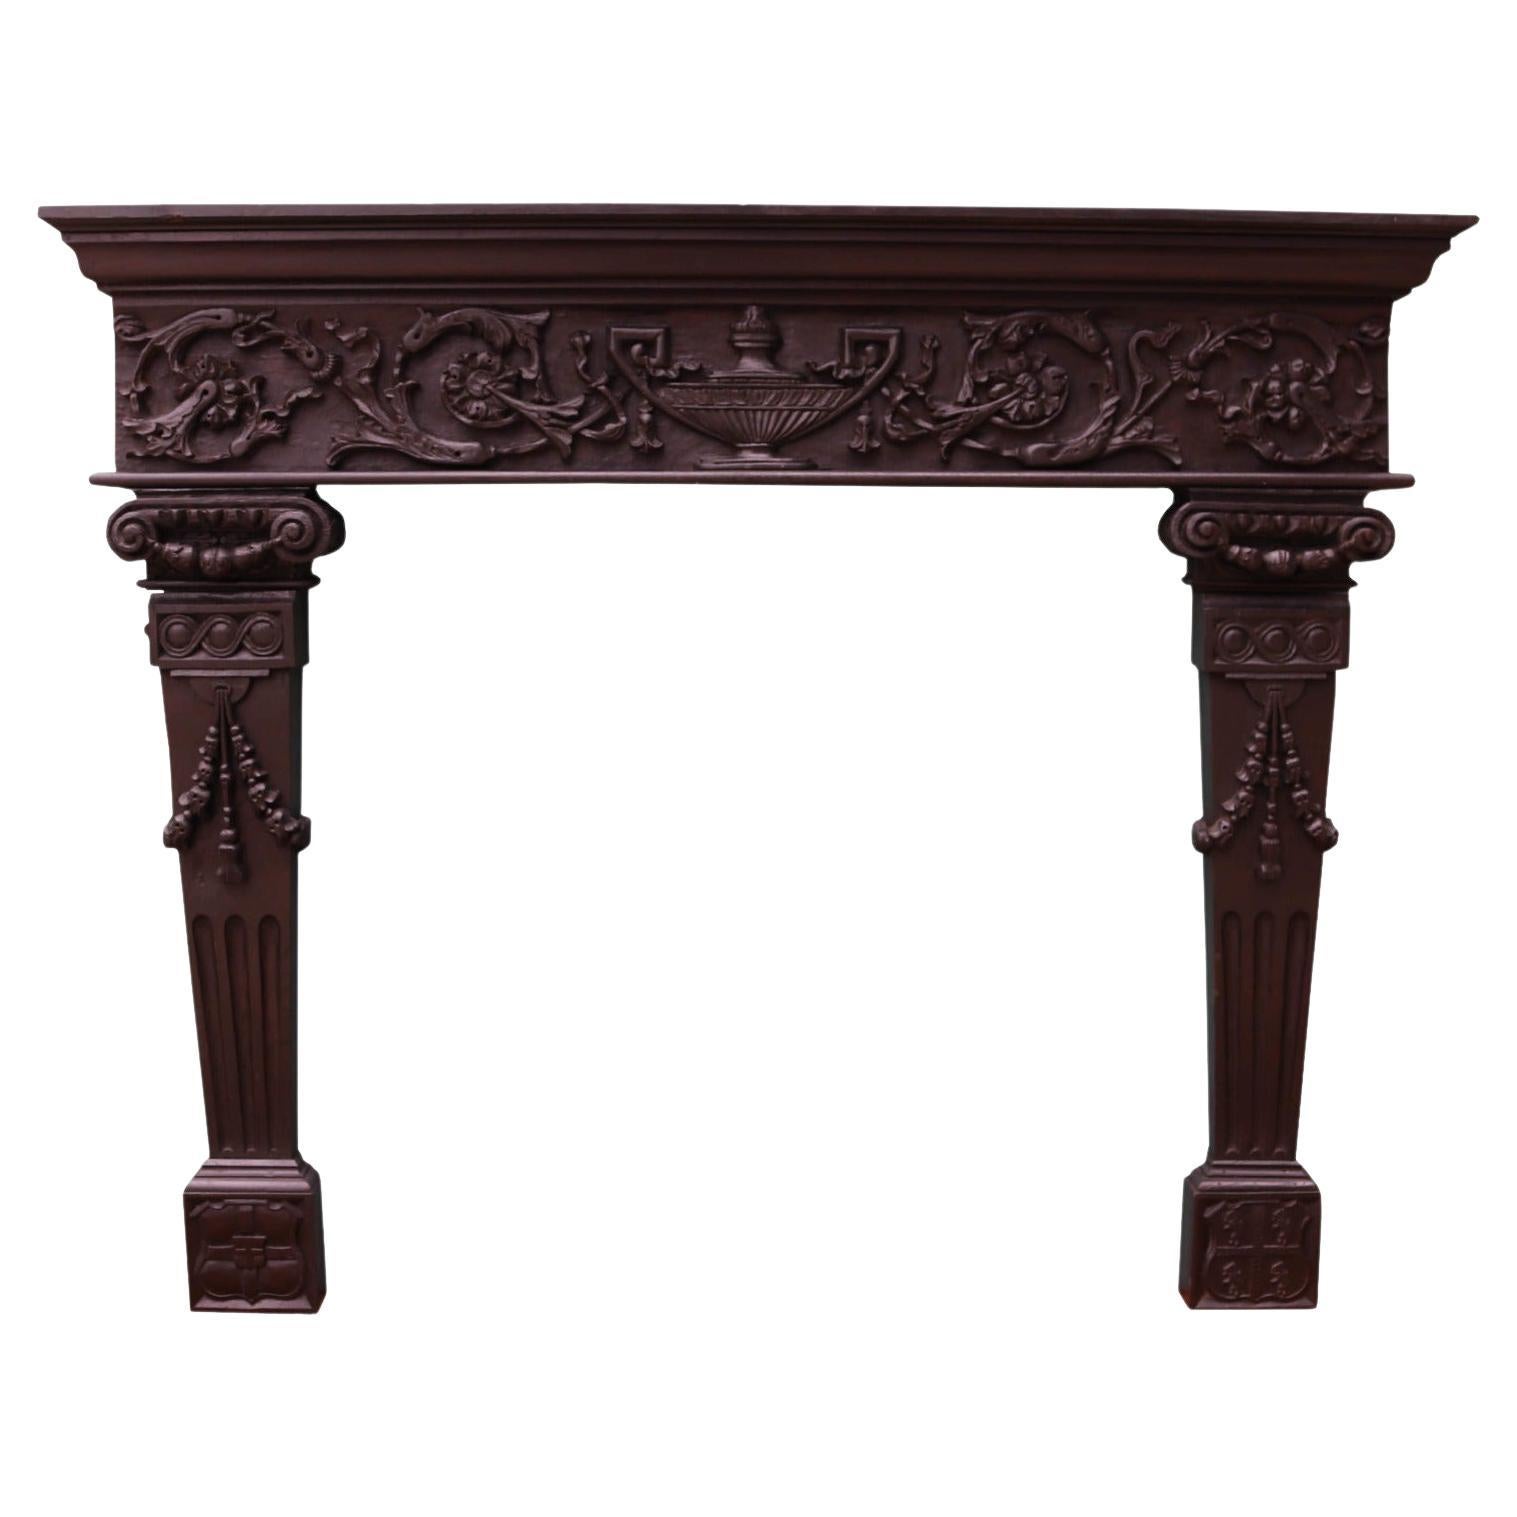 English Carved Oak Tudor Style Fireplace For Sale